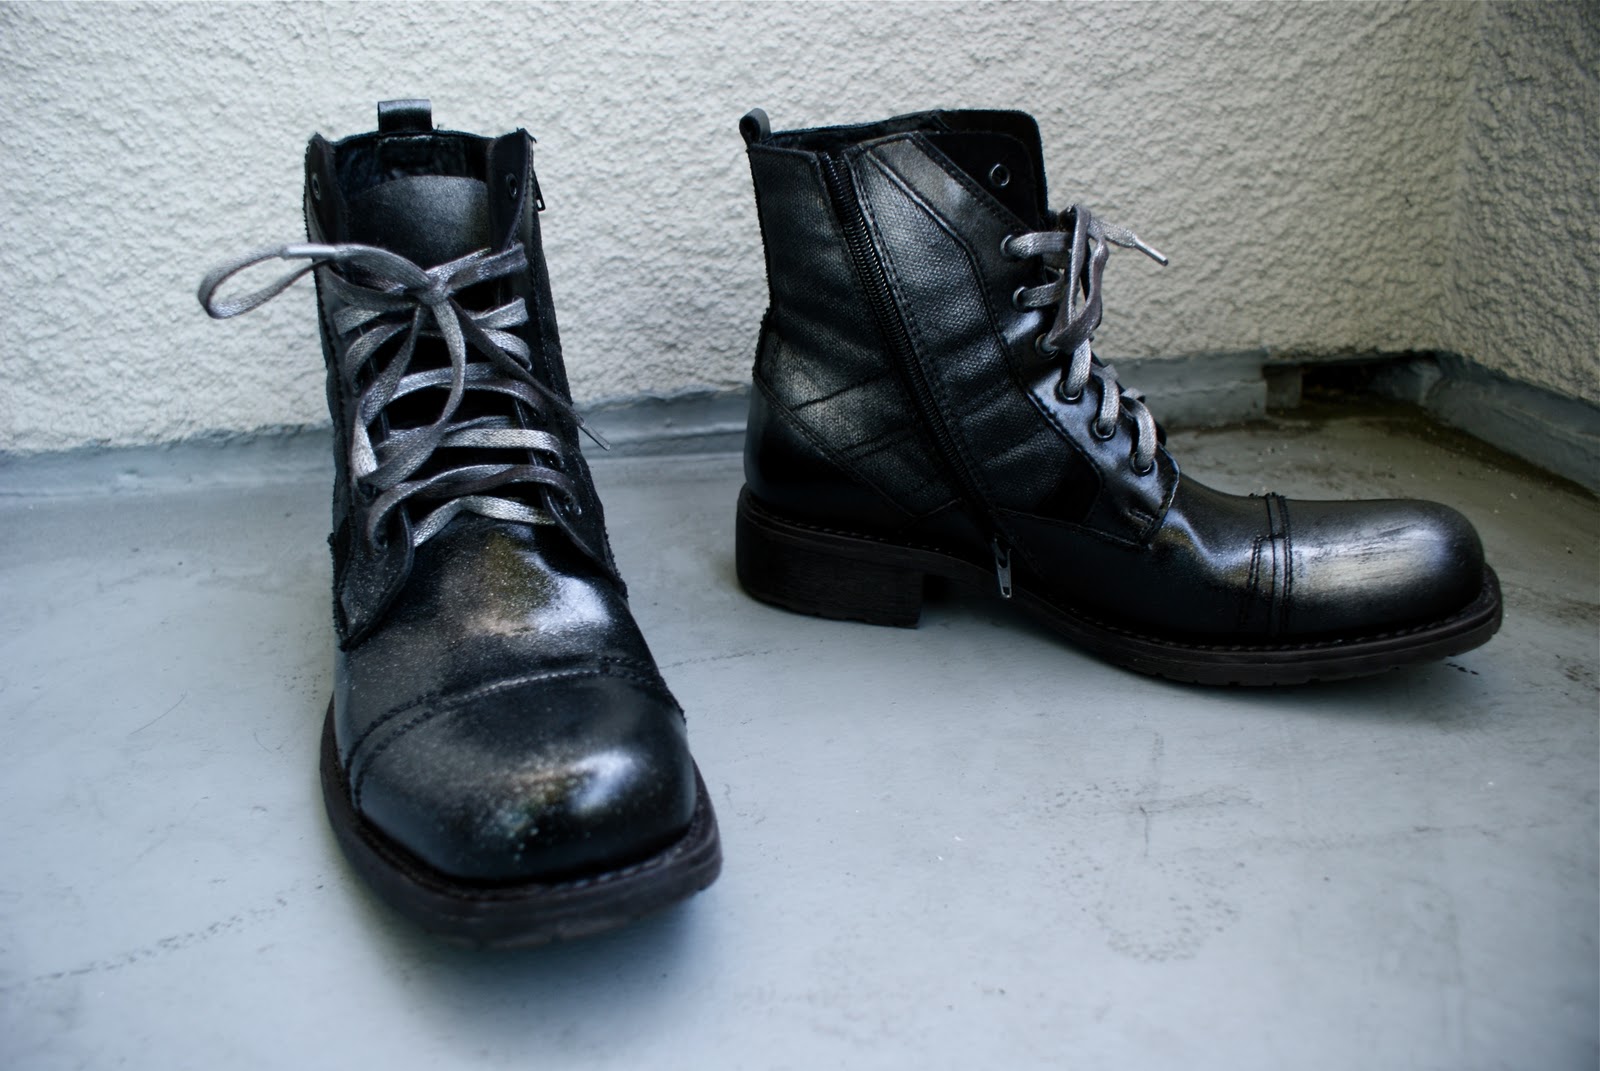 A Blog For Poor Creative People: Spray Paint Shoes